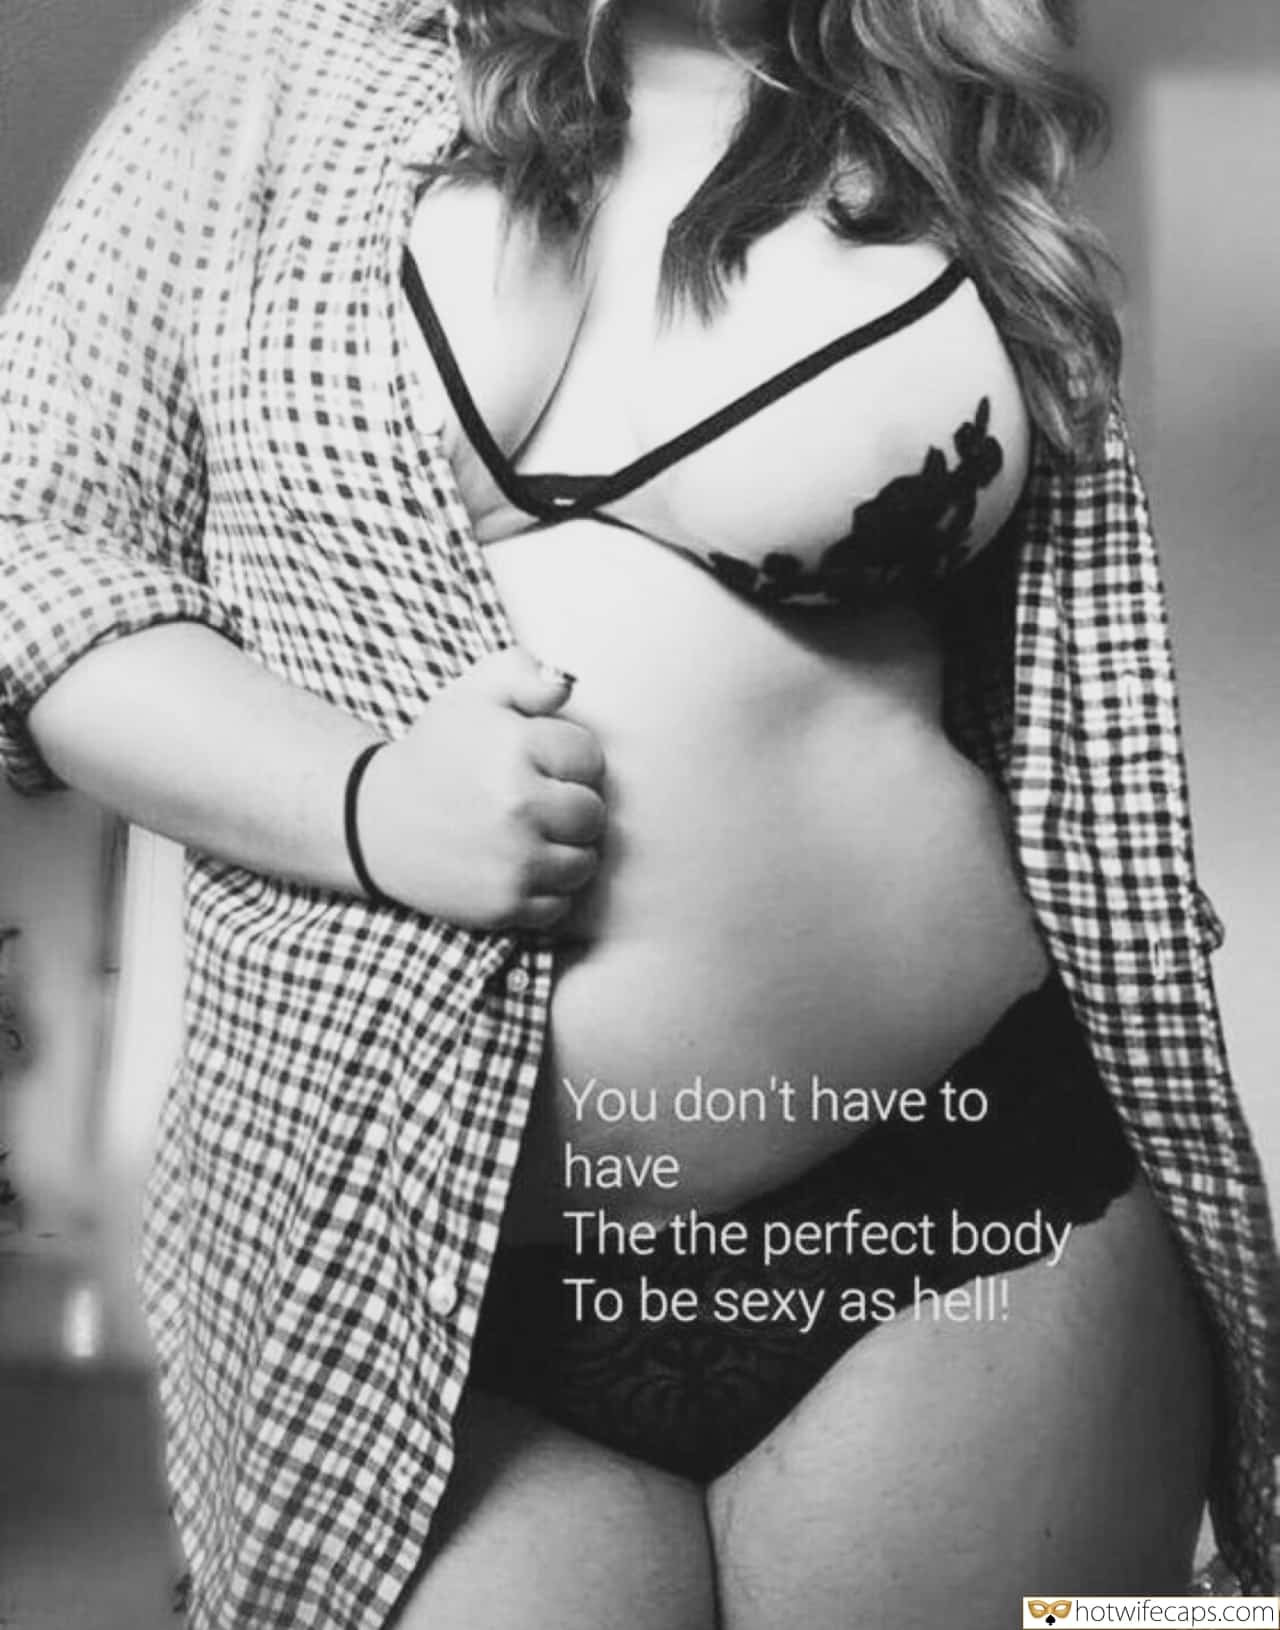 Sexy Memes hotwife caption: You don’t have to have The the perfect body To be sexy as hell! Chubby Babe Looks Hot in Lace Lingerie